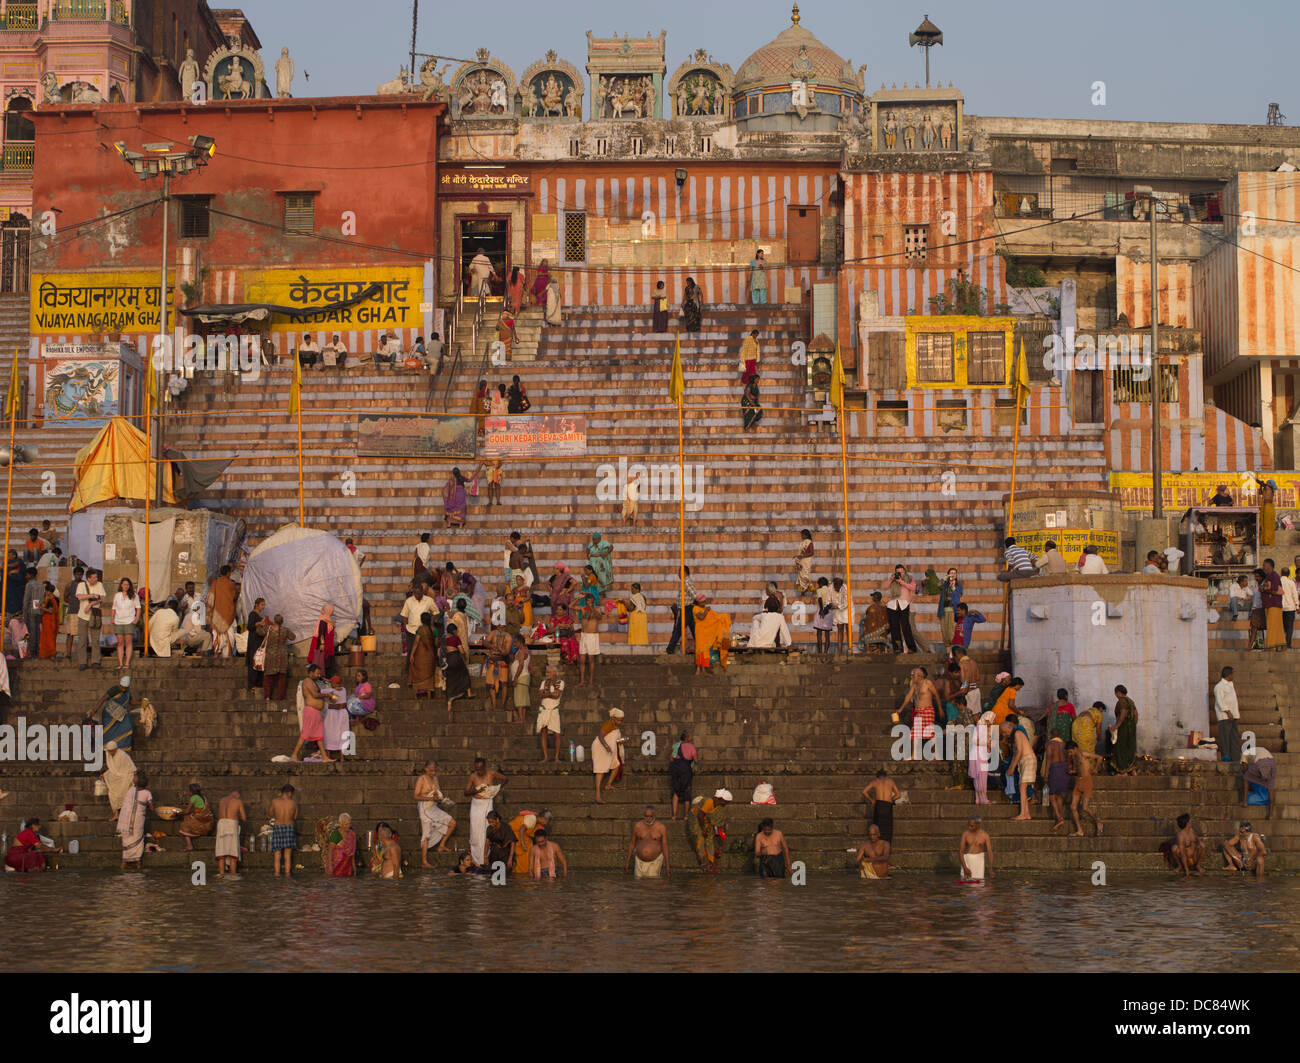 Bathing and Purification in the Ganges River at dawn - Varanasi, India. Studies have reported high pollution - fecal coliform Stock Photo